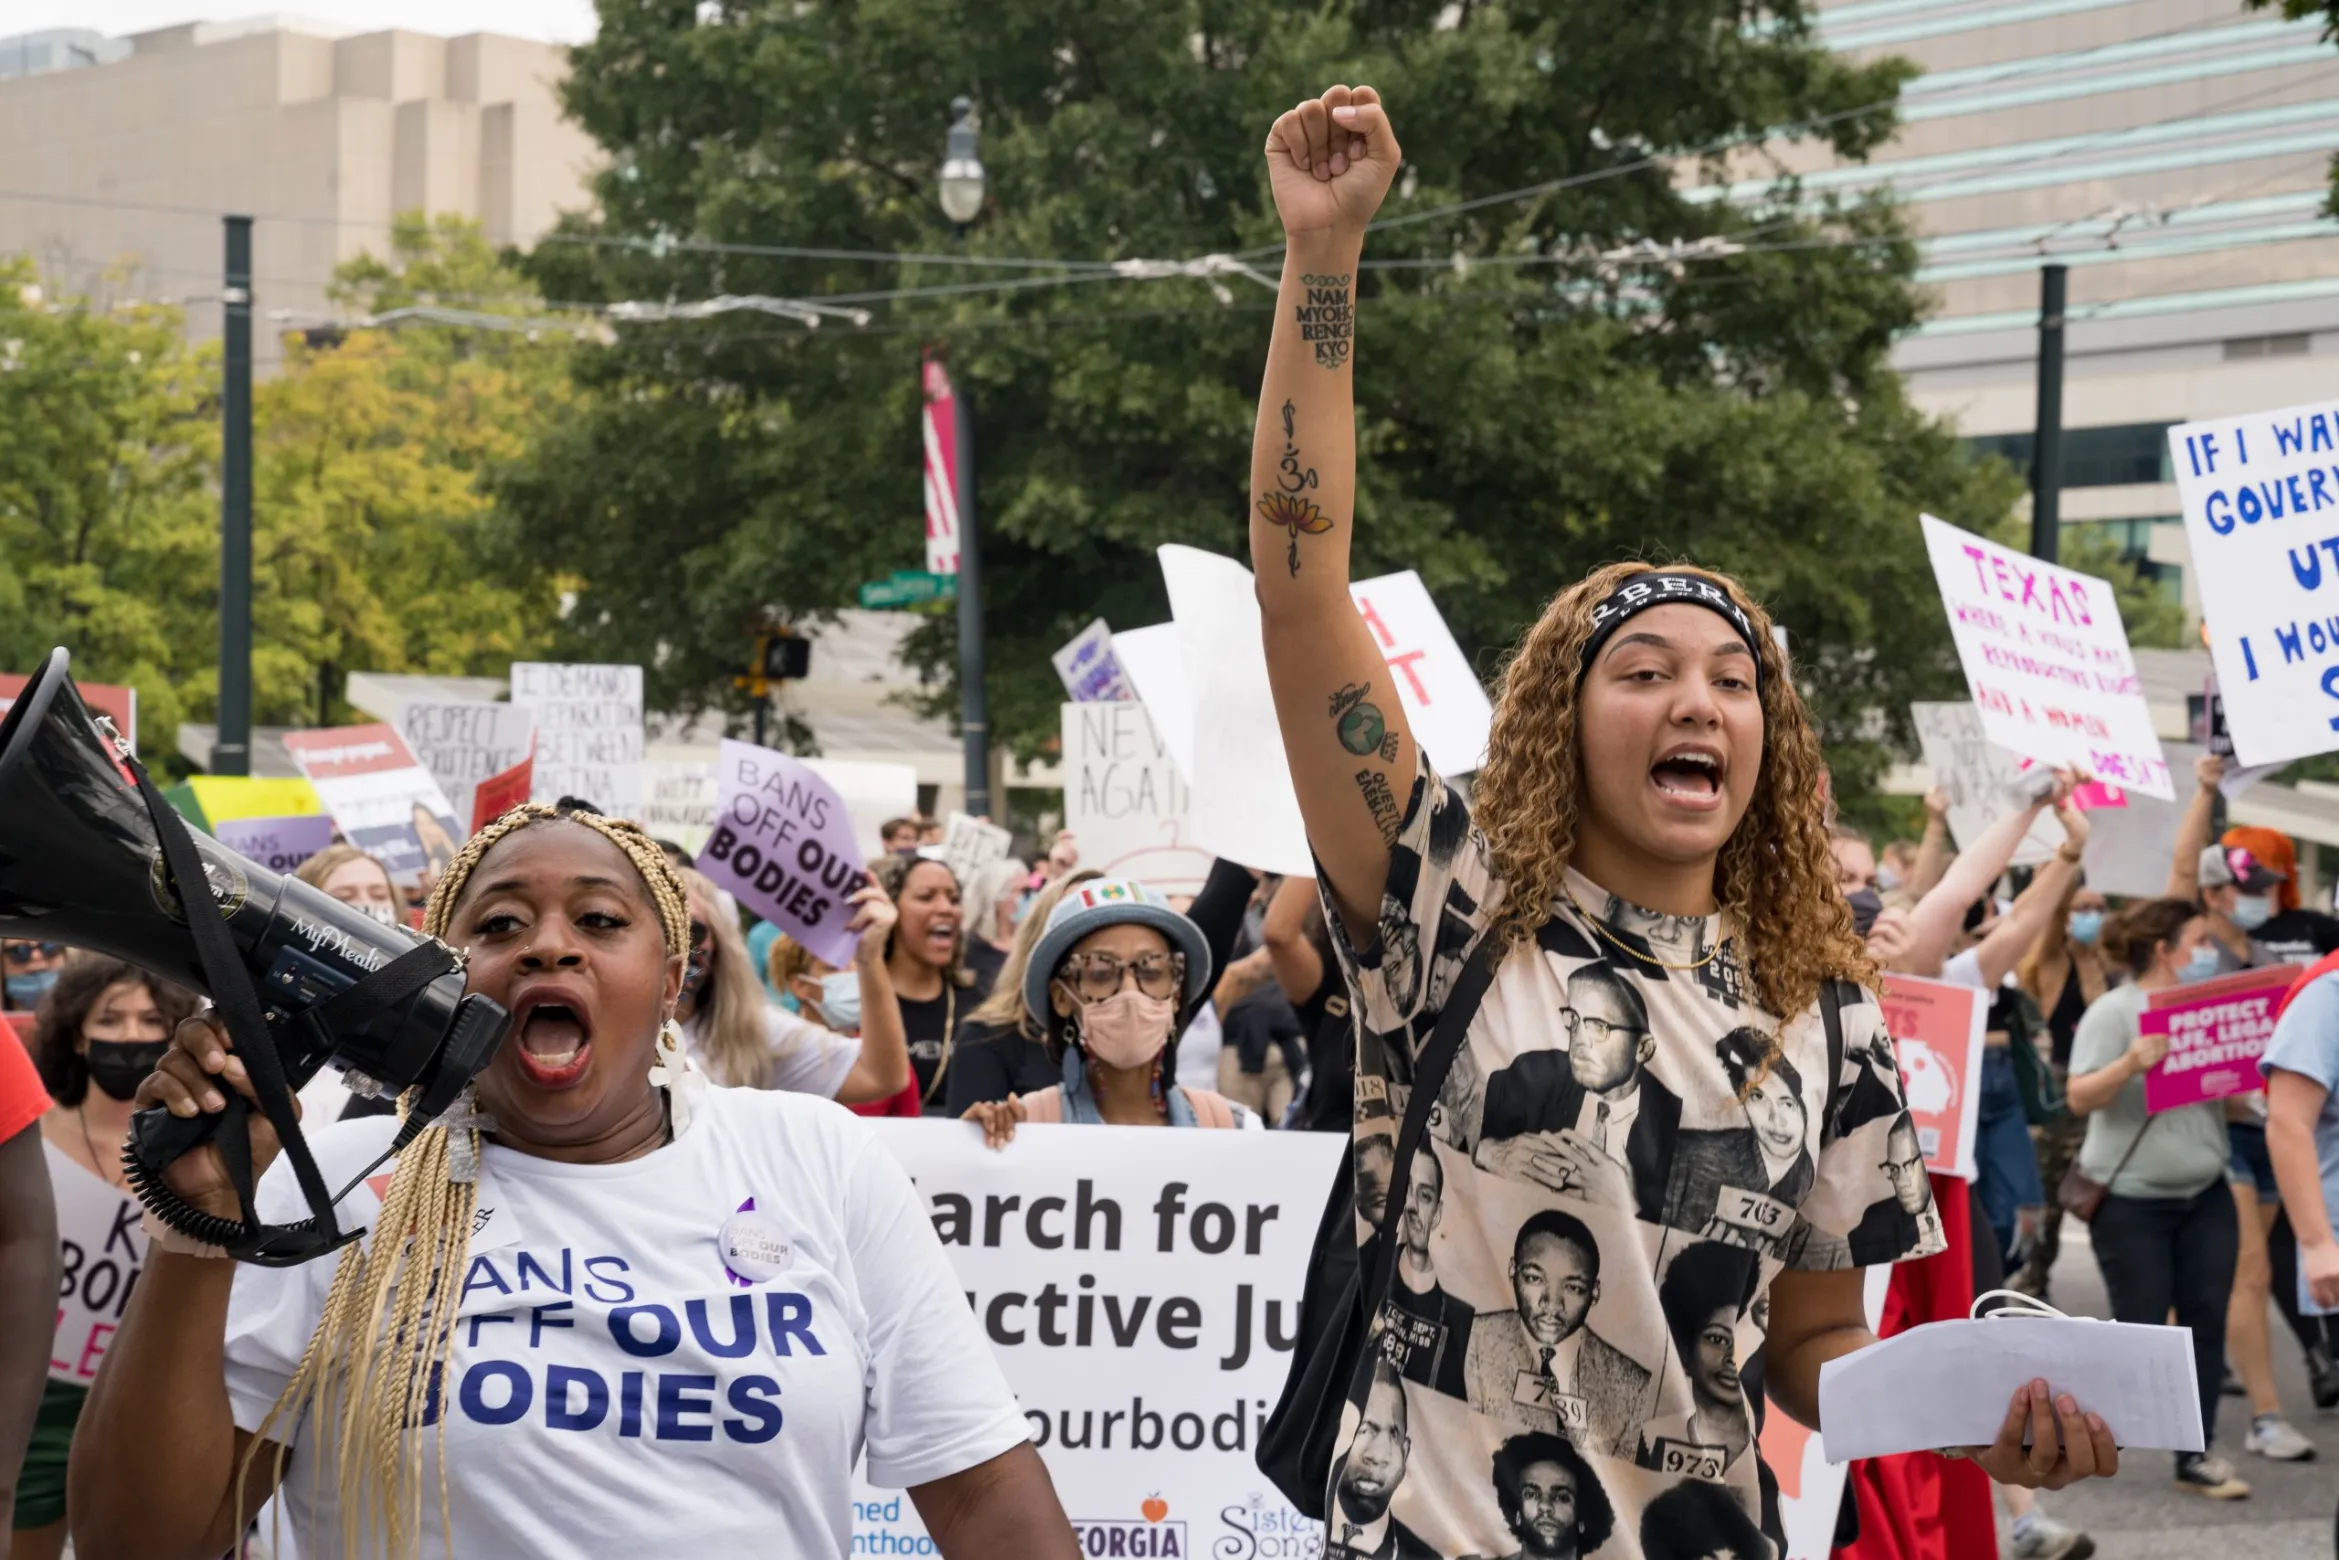 Porchse Queen Miller (L) leads a group of demonstrators in support of women's reproductive rights on Oct. 2, 2021, in Atlanta. The Women's March and other groups organized marches across the country to protest the new abortion law in Texas.